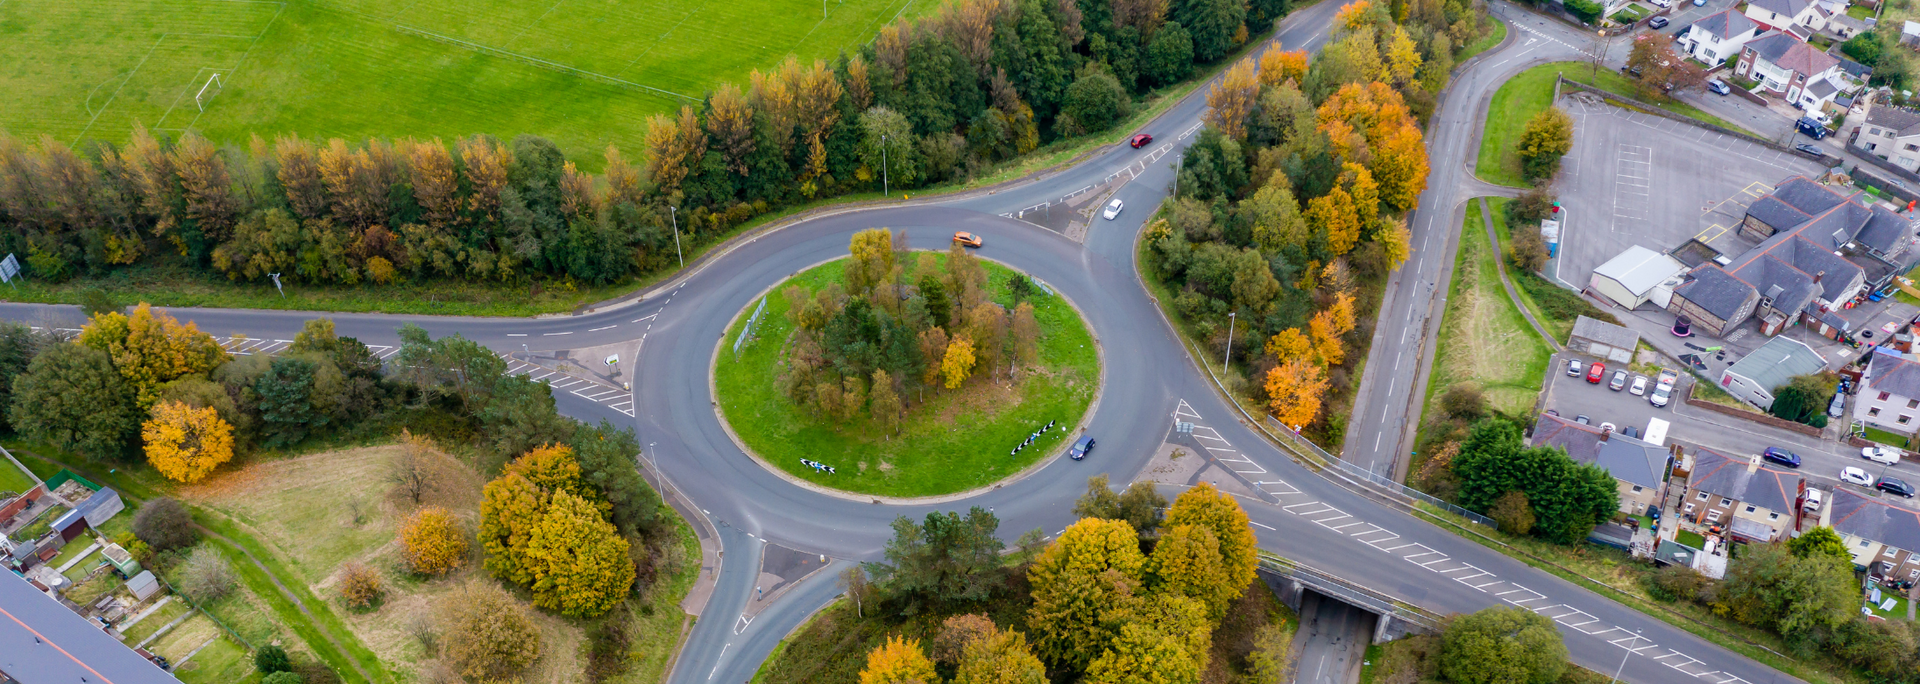 Picture of a Roundabout